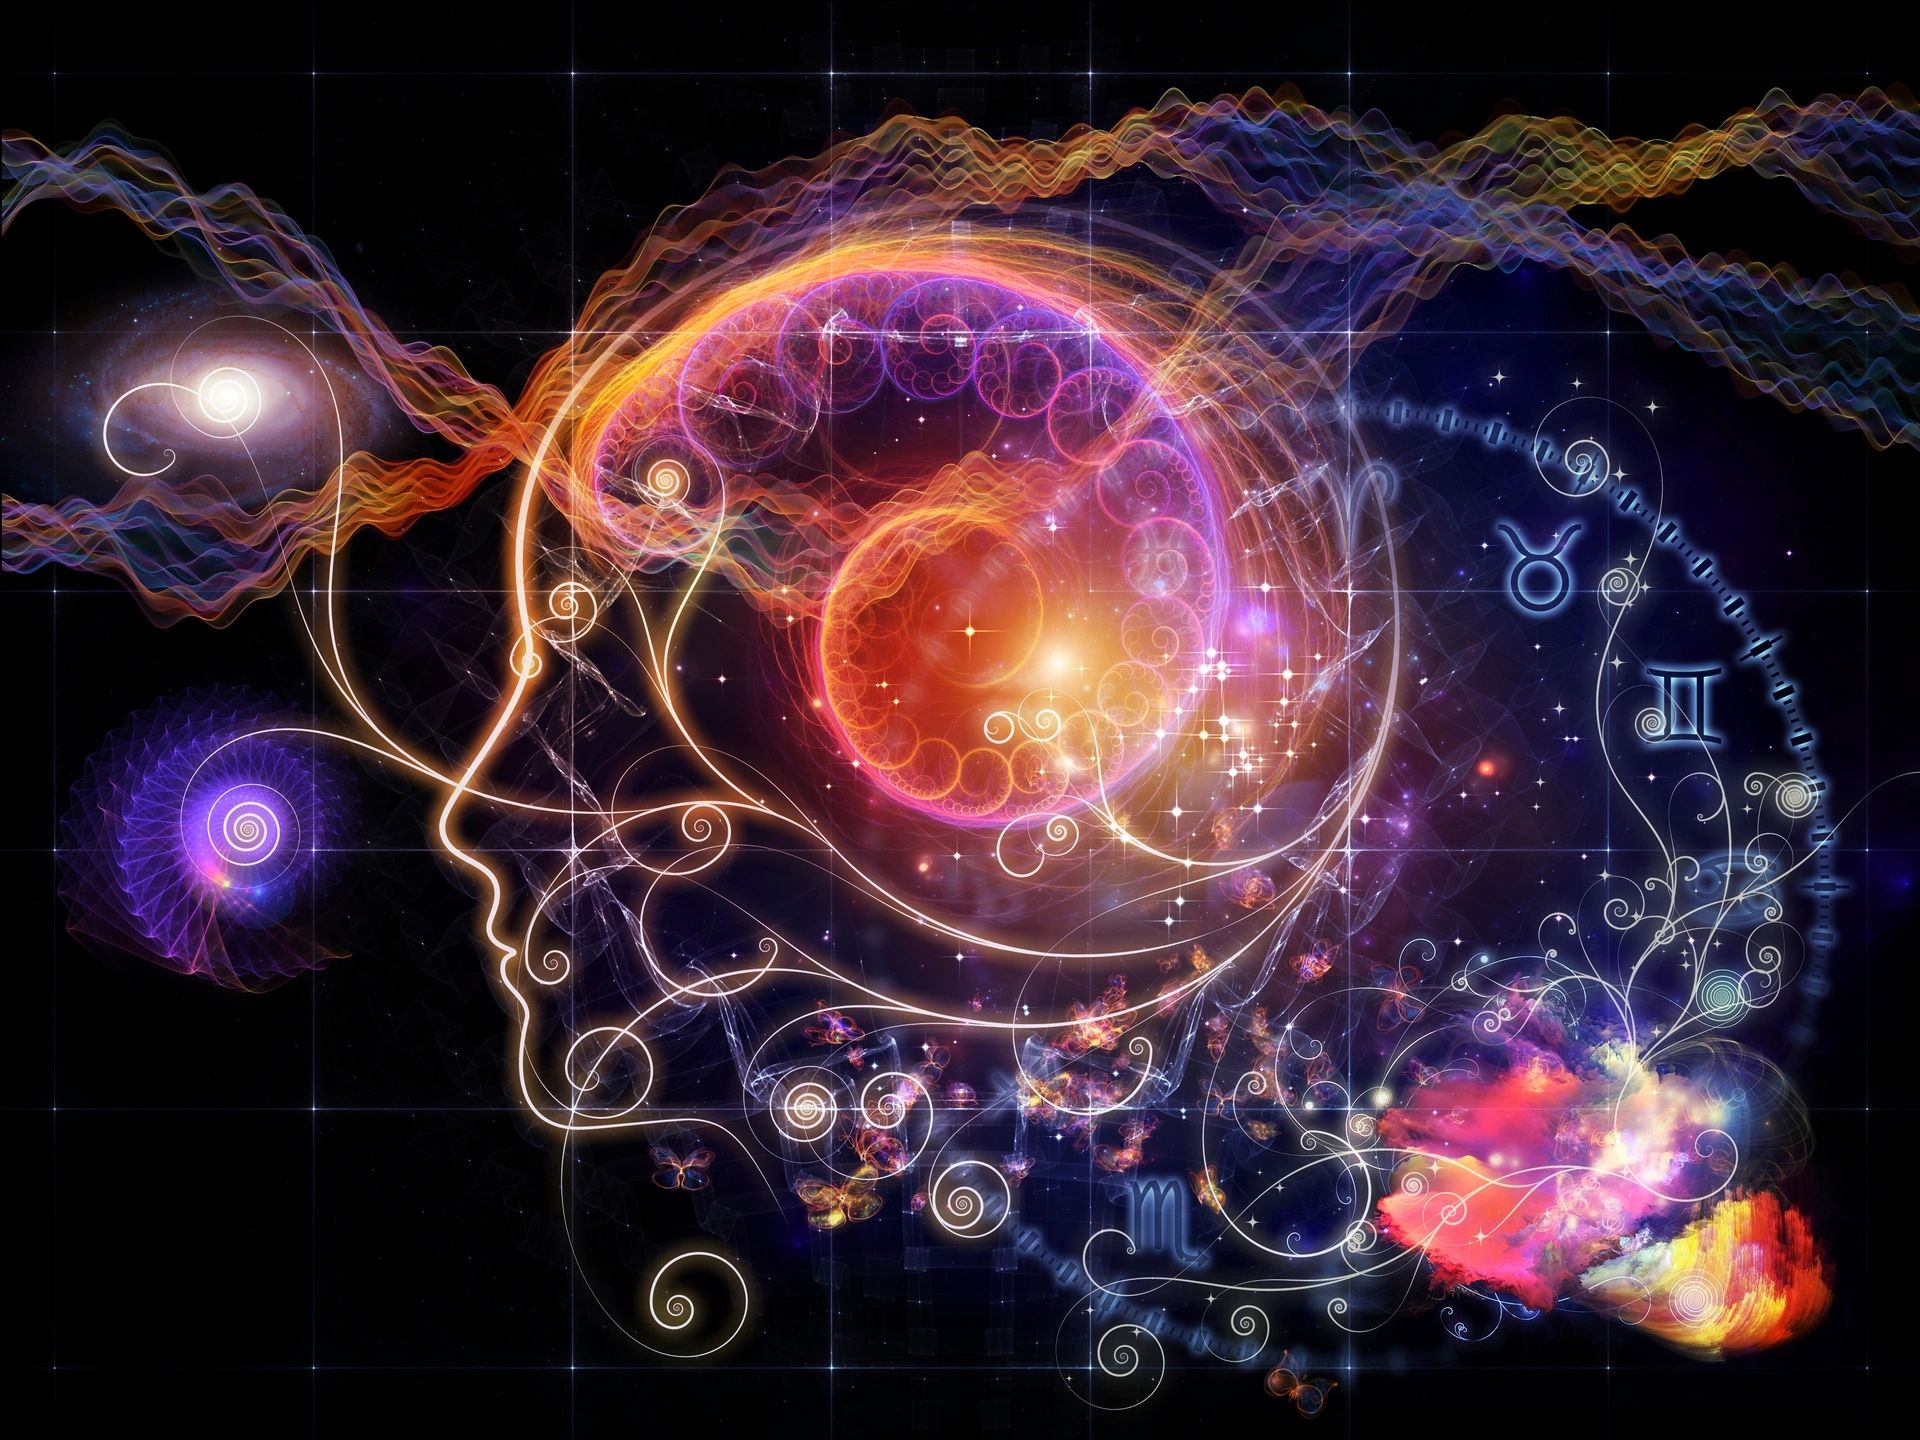 Head, mind and brain showing the energy and neurons by light, zodiac signs and the universe